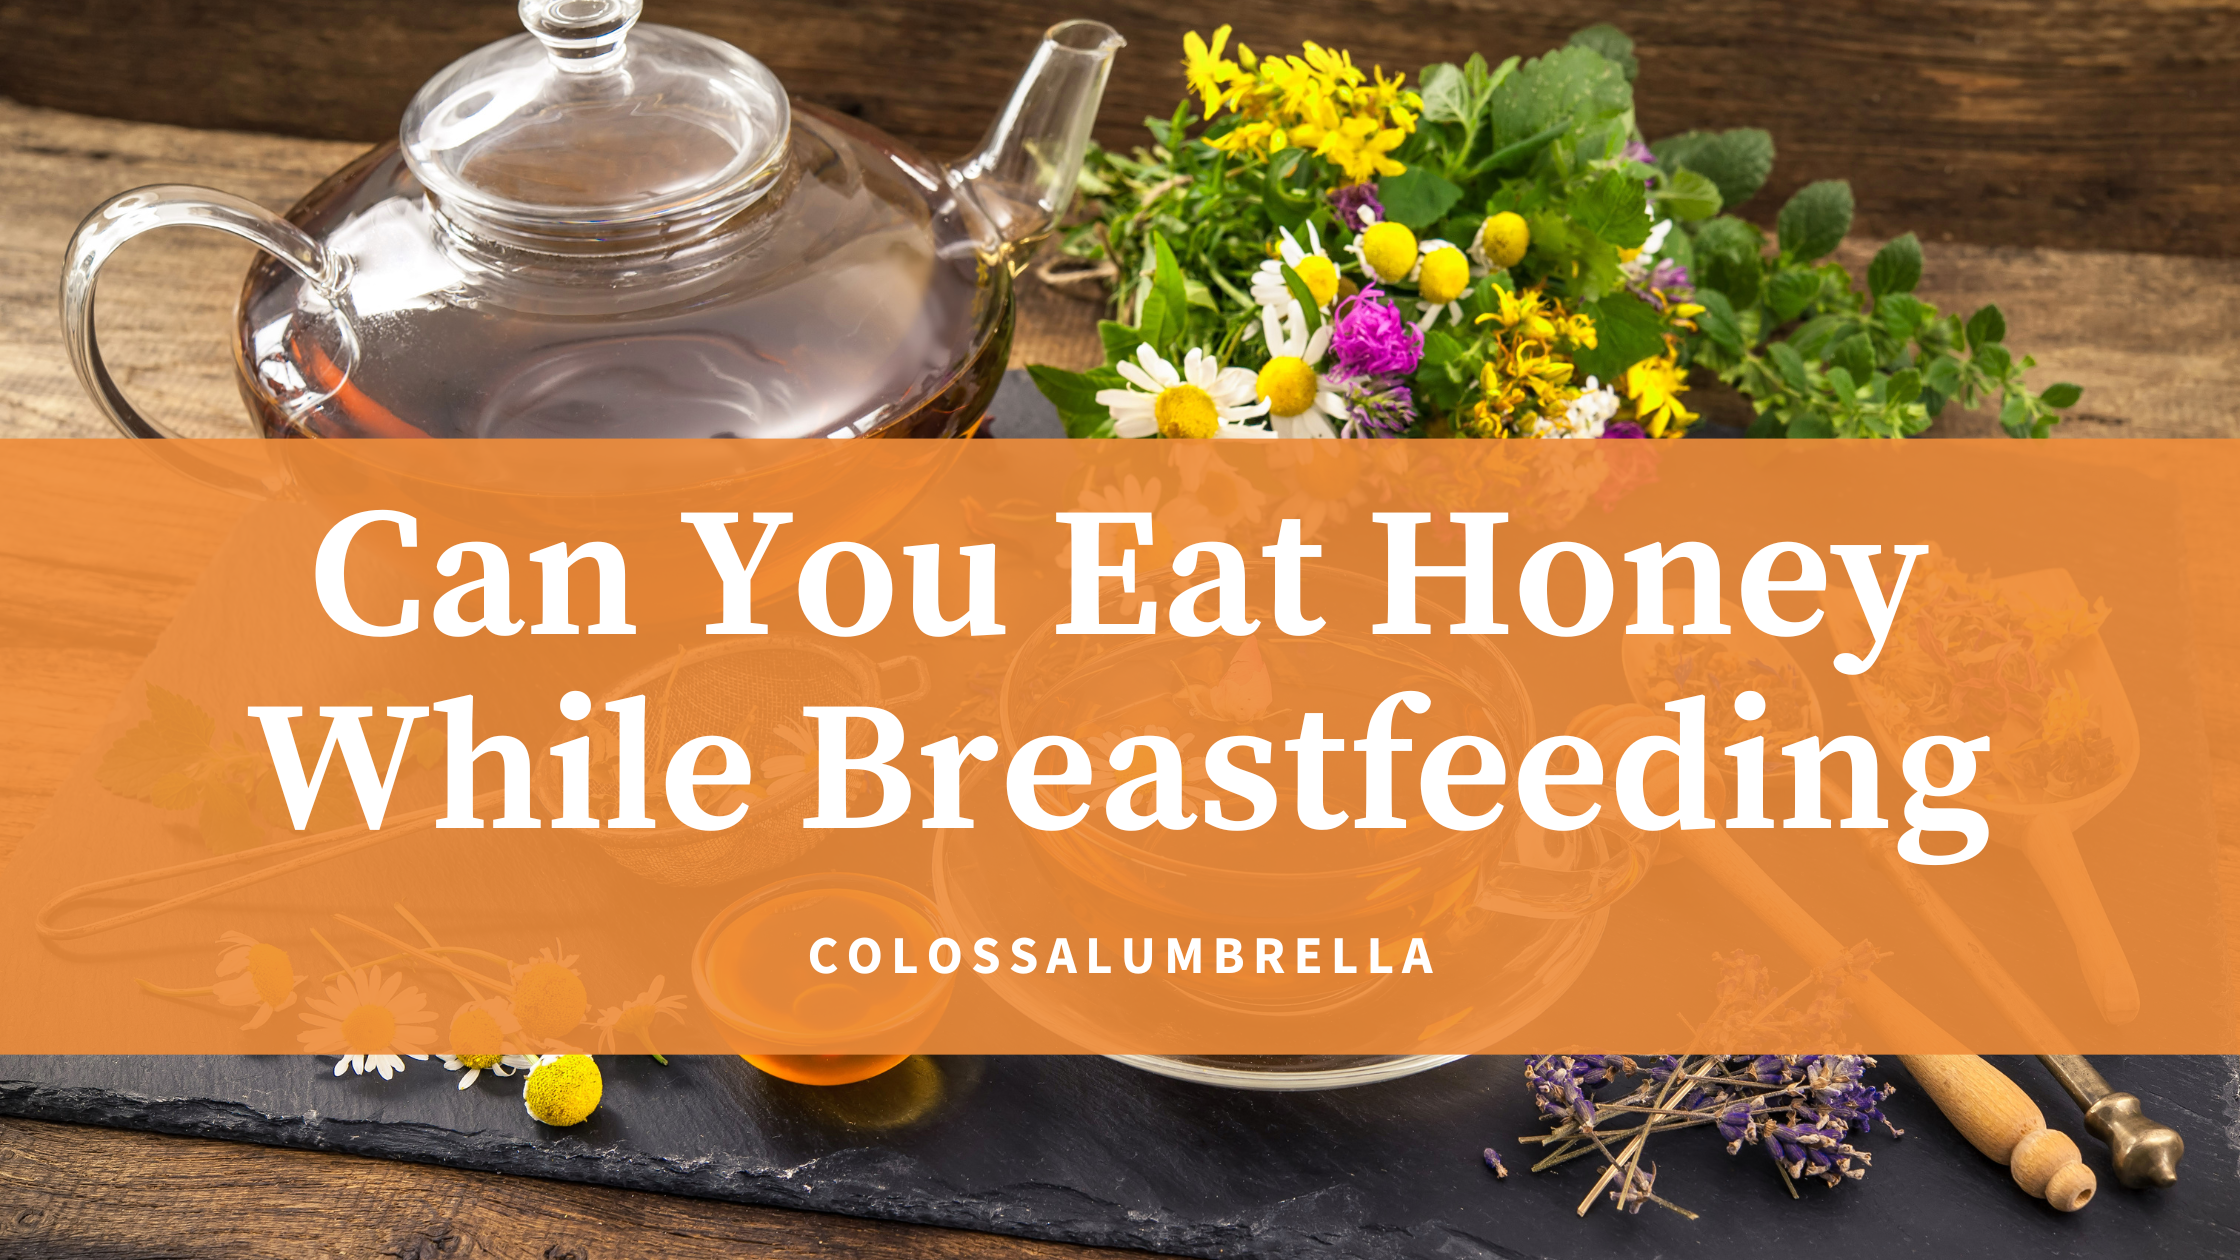 Can you Eat Honey While Breastfeeding